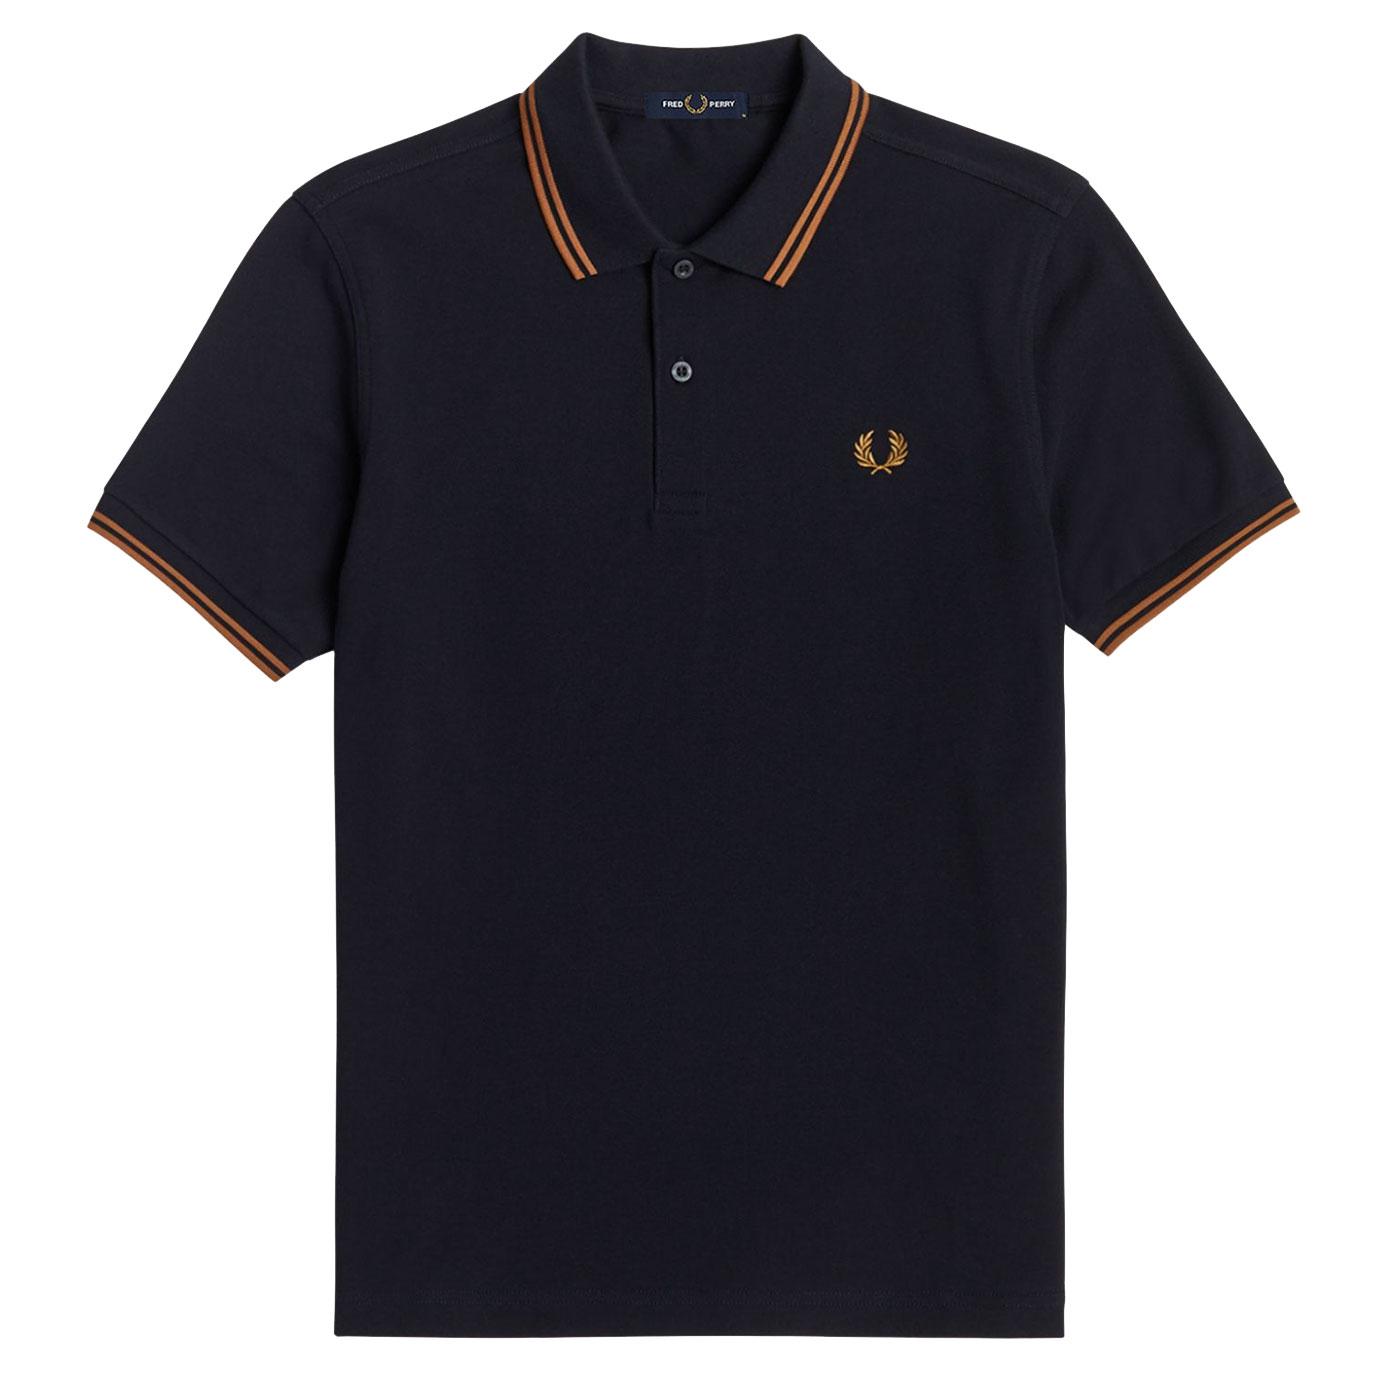 FRED PERRY M3600 Men's Twin Tipped Pique Polo N/DC